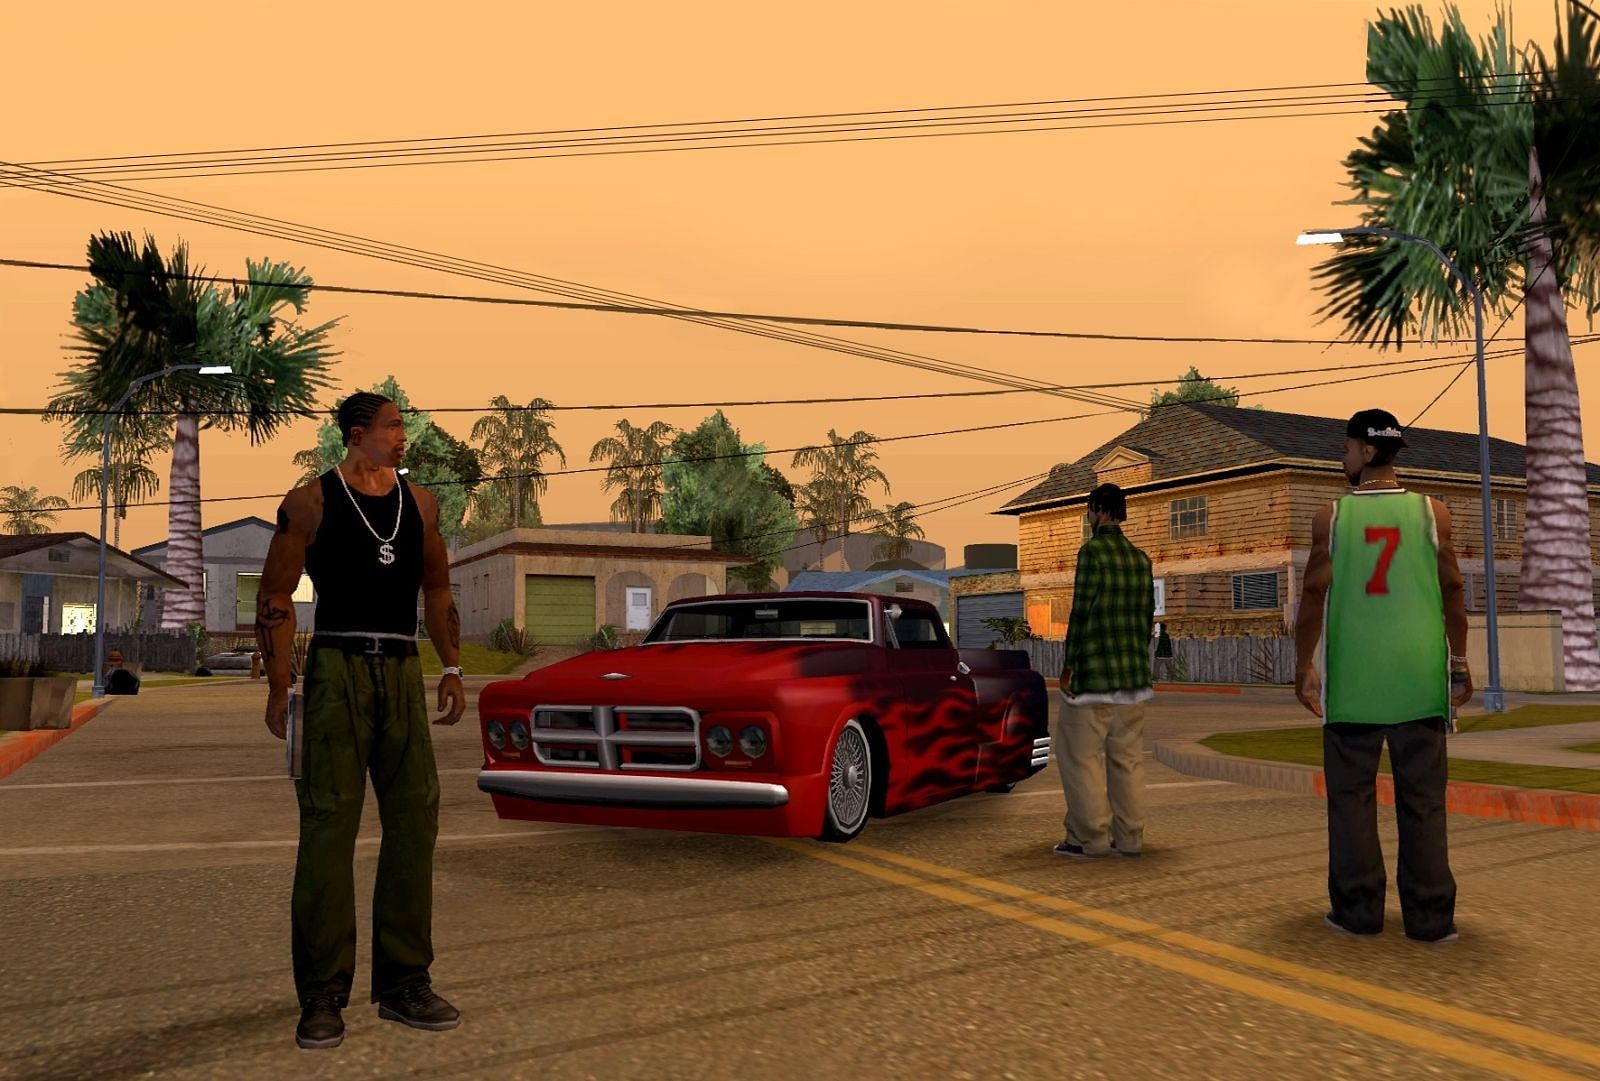 GTA San Andreas is still the best GTA game to some gamers (Image via Rockstar Games)